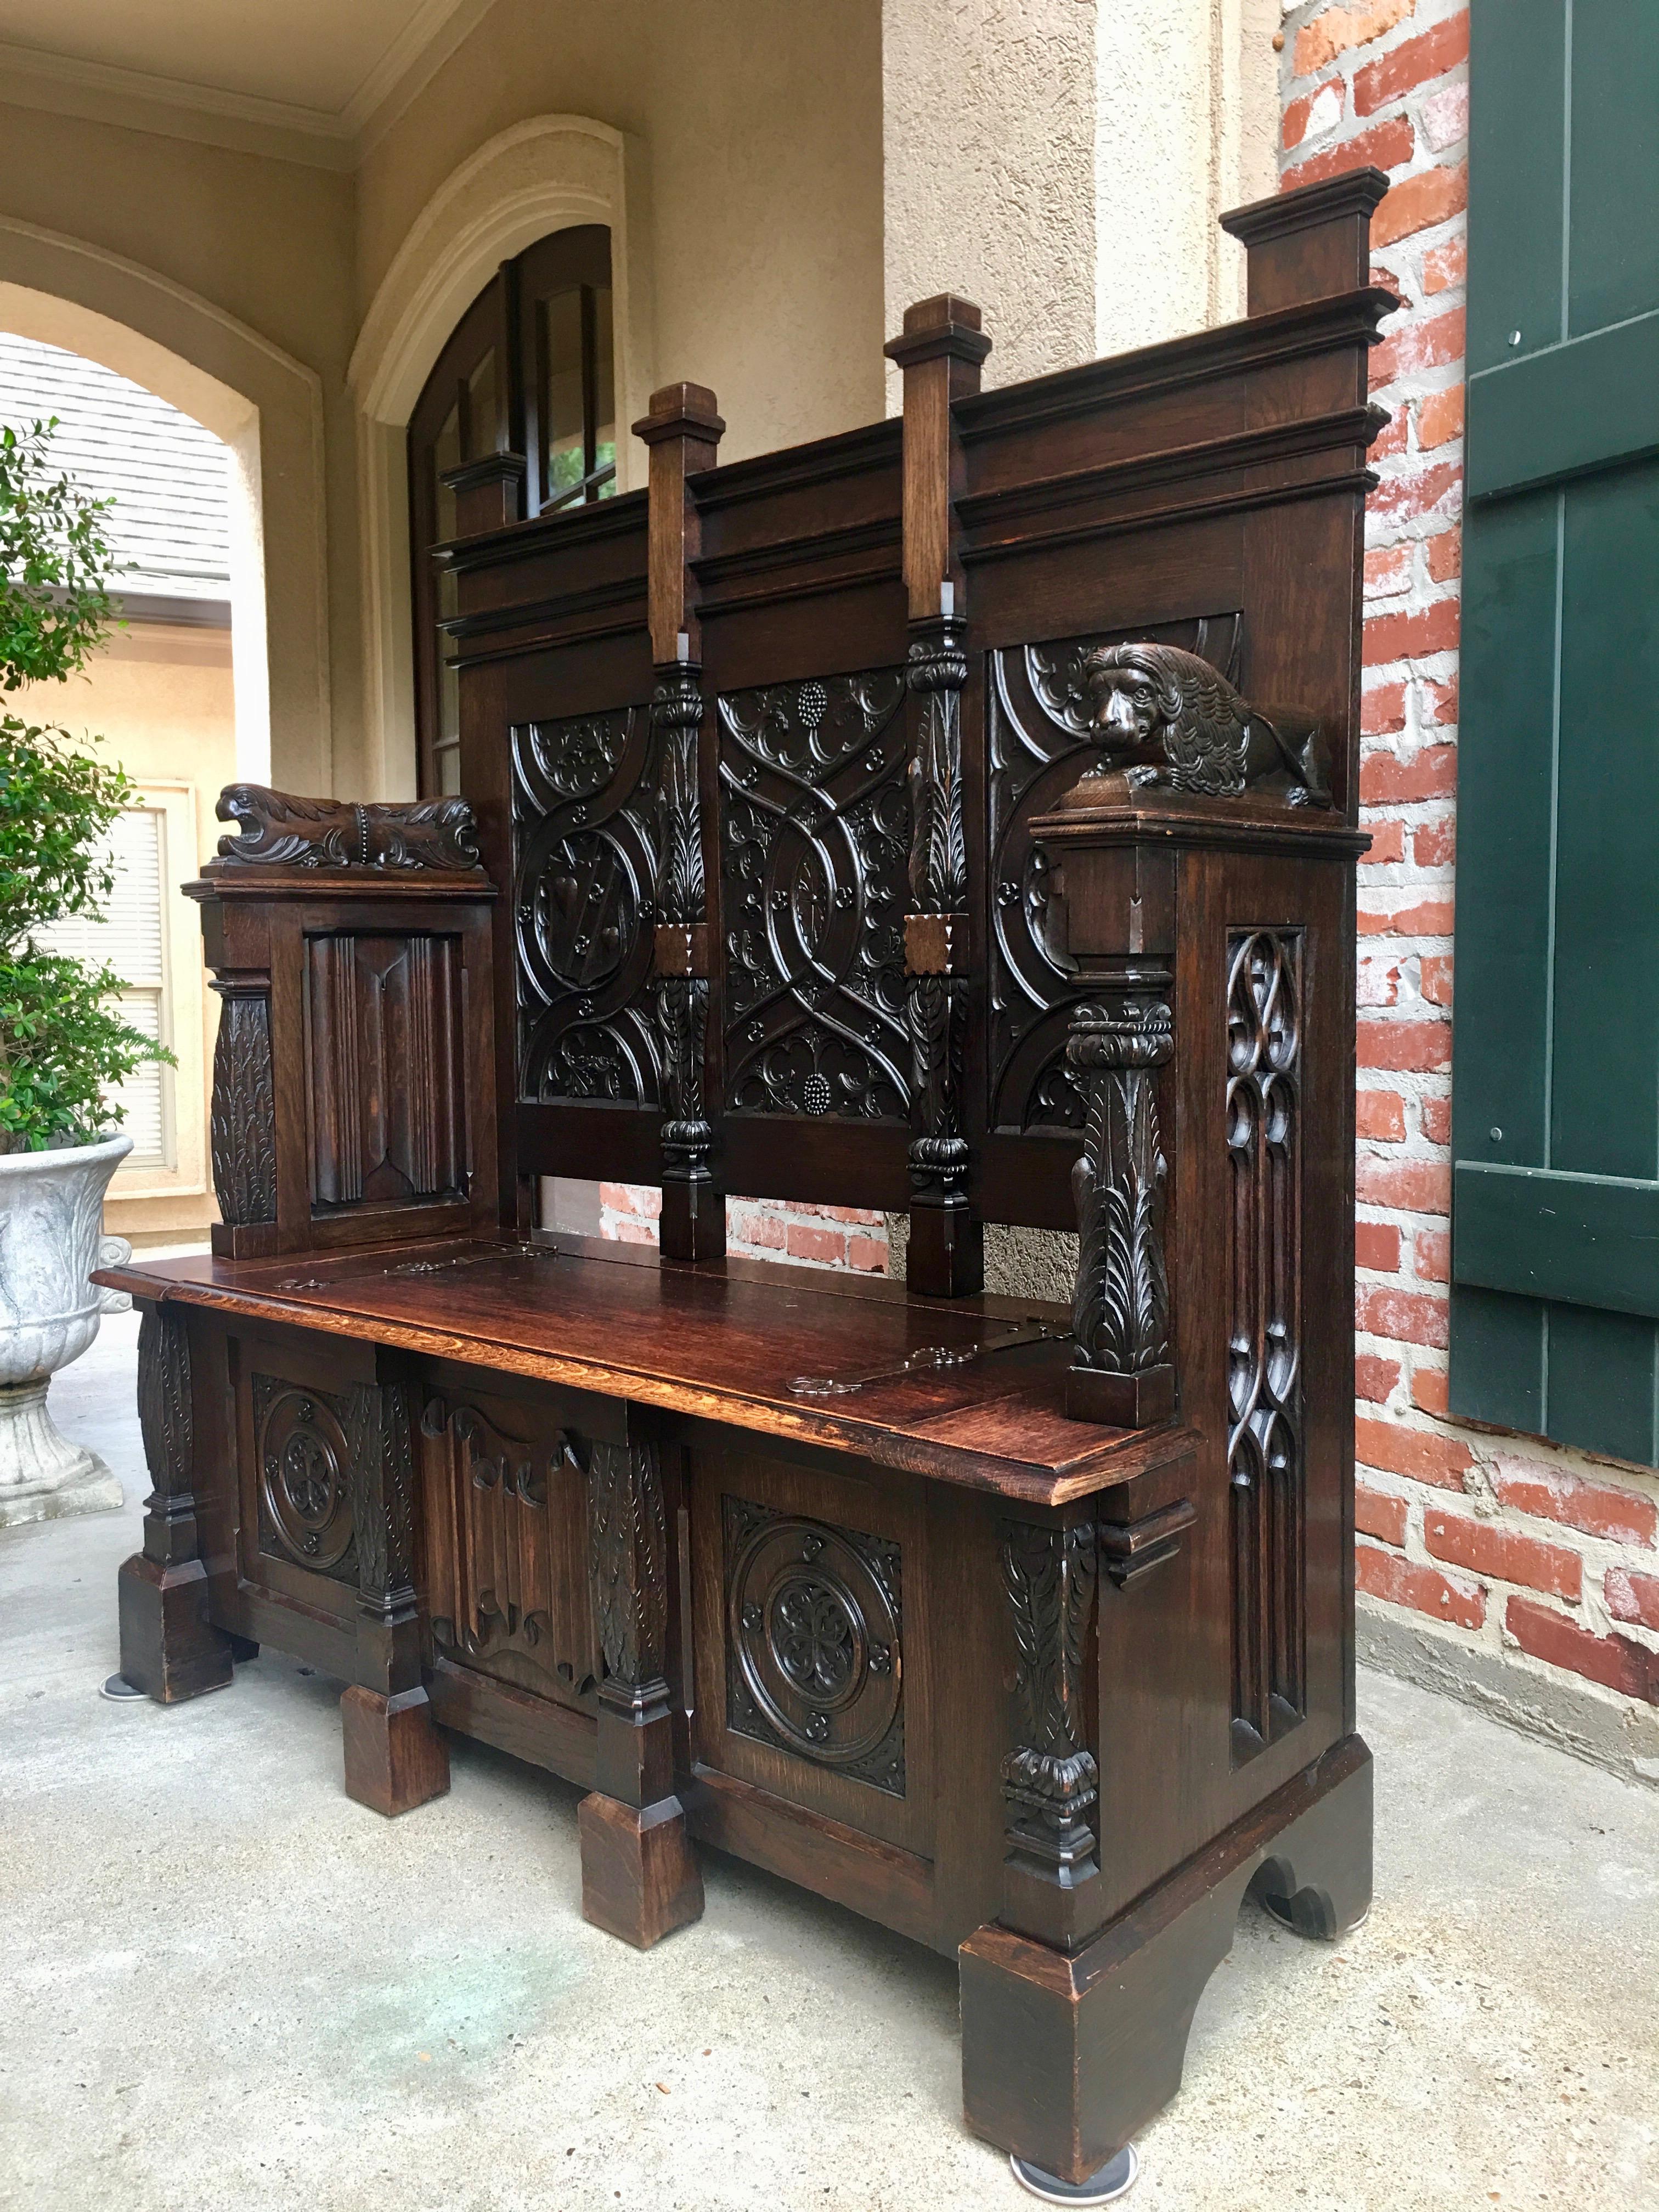 Direct from France, a heavily carved dark oak antique French pew or bench , stunning detail and superb quality!~
~Definitely a statement piece for any room, with a height of almost 5 ft. and carved panels that were surely commissioned to tell a